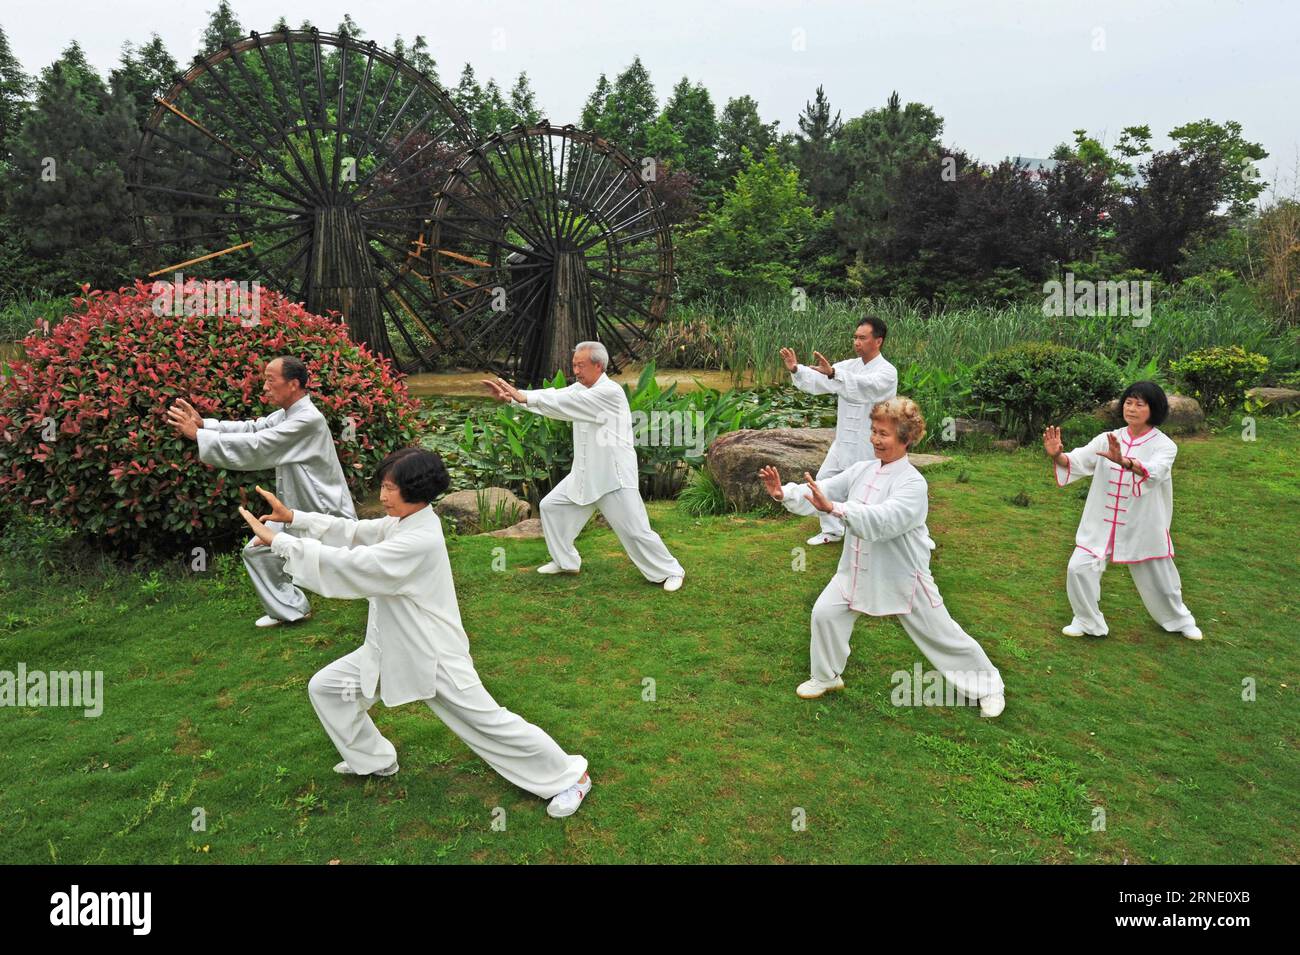 (160605) -- ANJI, June 5, 2016 -- Senior people practise Tai Chi in a park in Anji County, east China s Zhejiang Province, June 2, 2016. Anji is known for its pleasant environment with flourishing bamboo plantations and many scenes from the famous movie Crouching Tiger, Hidden Dragon were shot here. The county persists in green, low-carbon development, and strives to protect environment as well as to develop local economy. June 5 is observed as World Environment Day every year, and this year s theme issued by China s Ministry of Environment Protection is improving the quality of the environmen Stock Photo